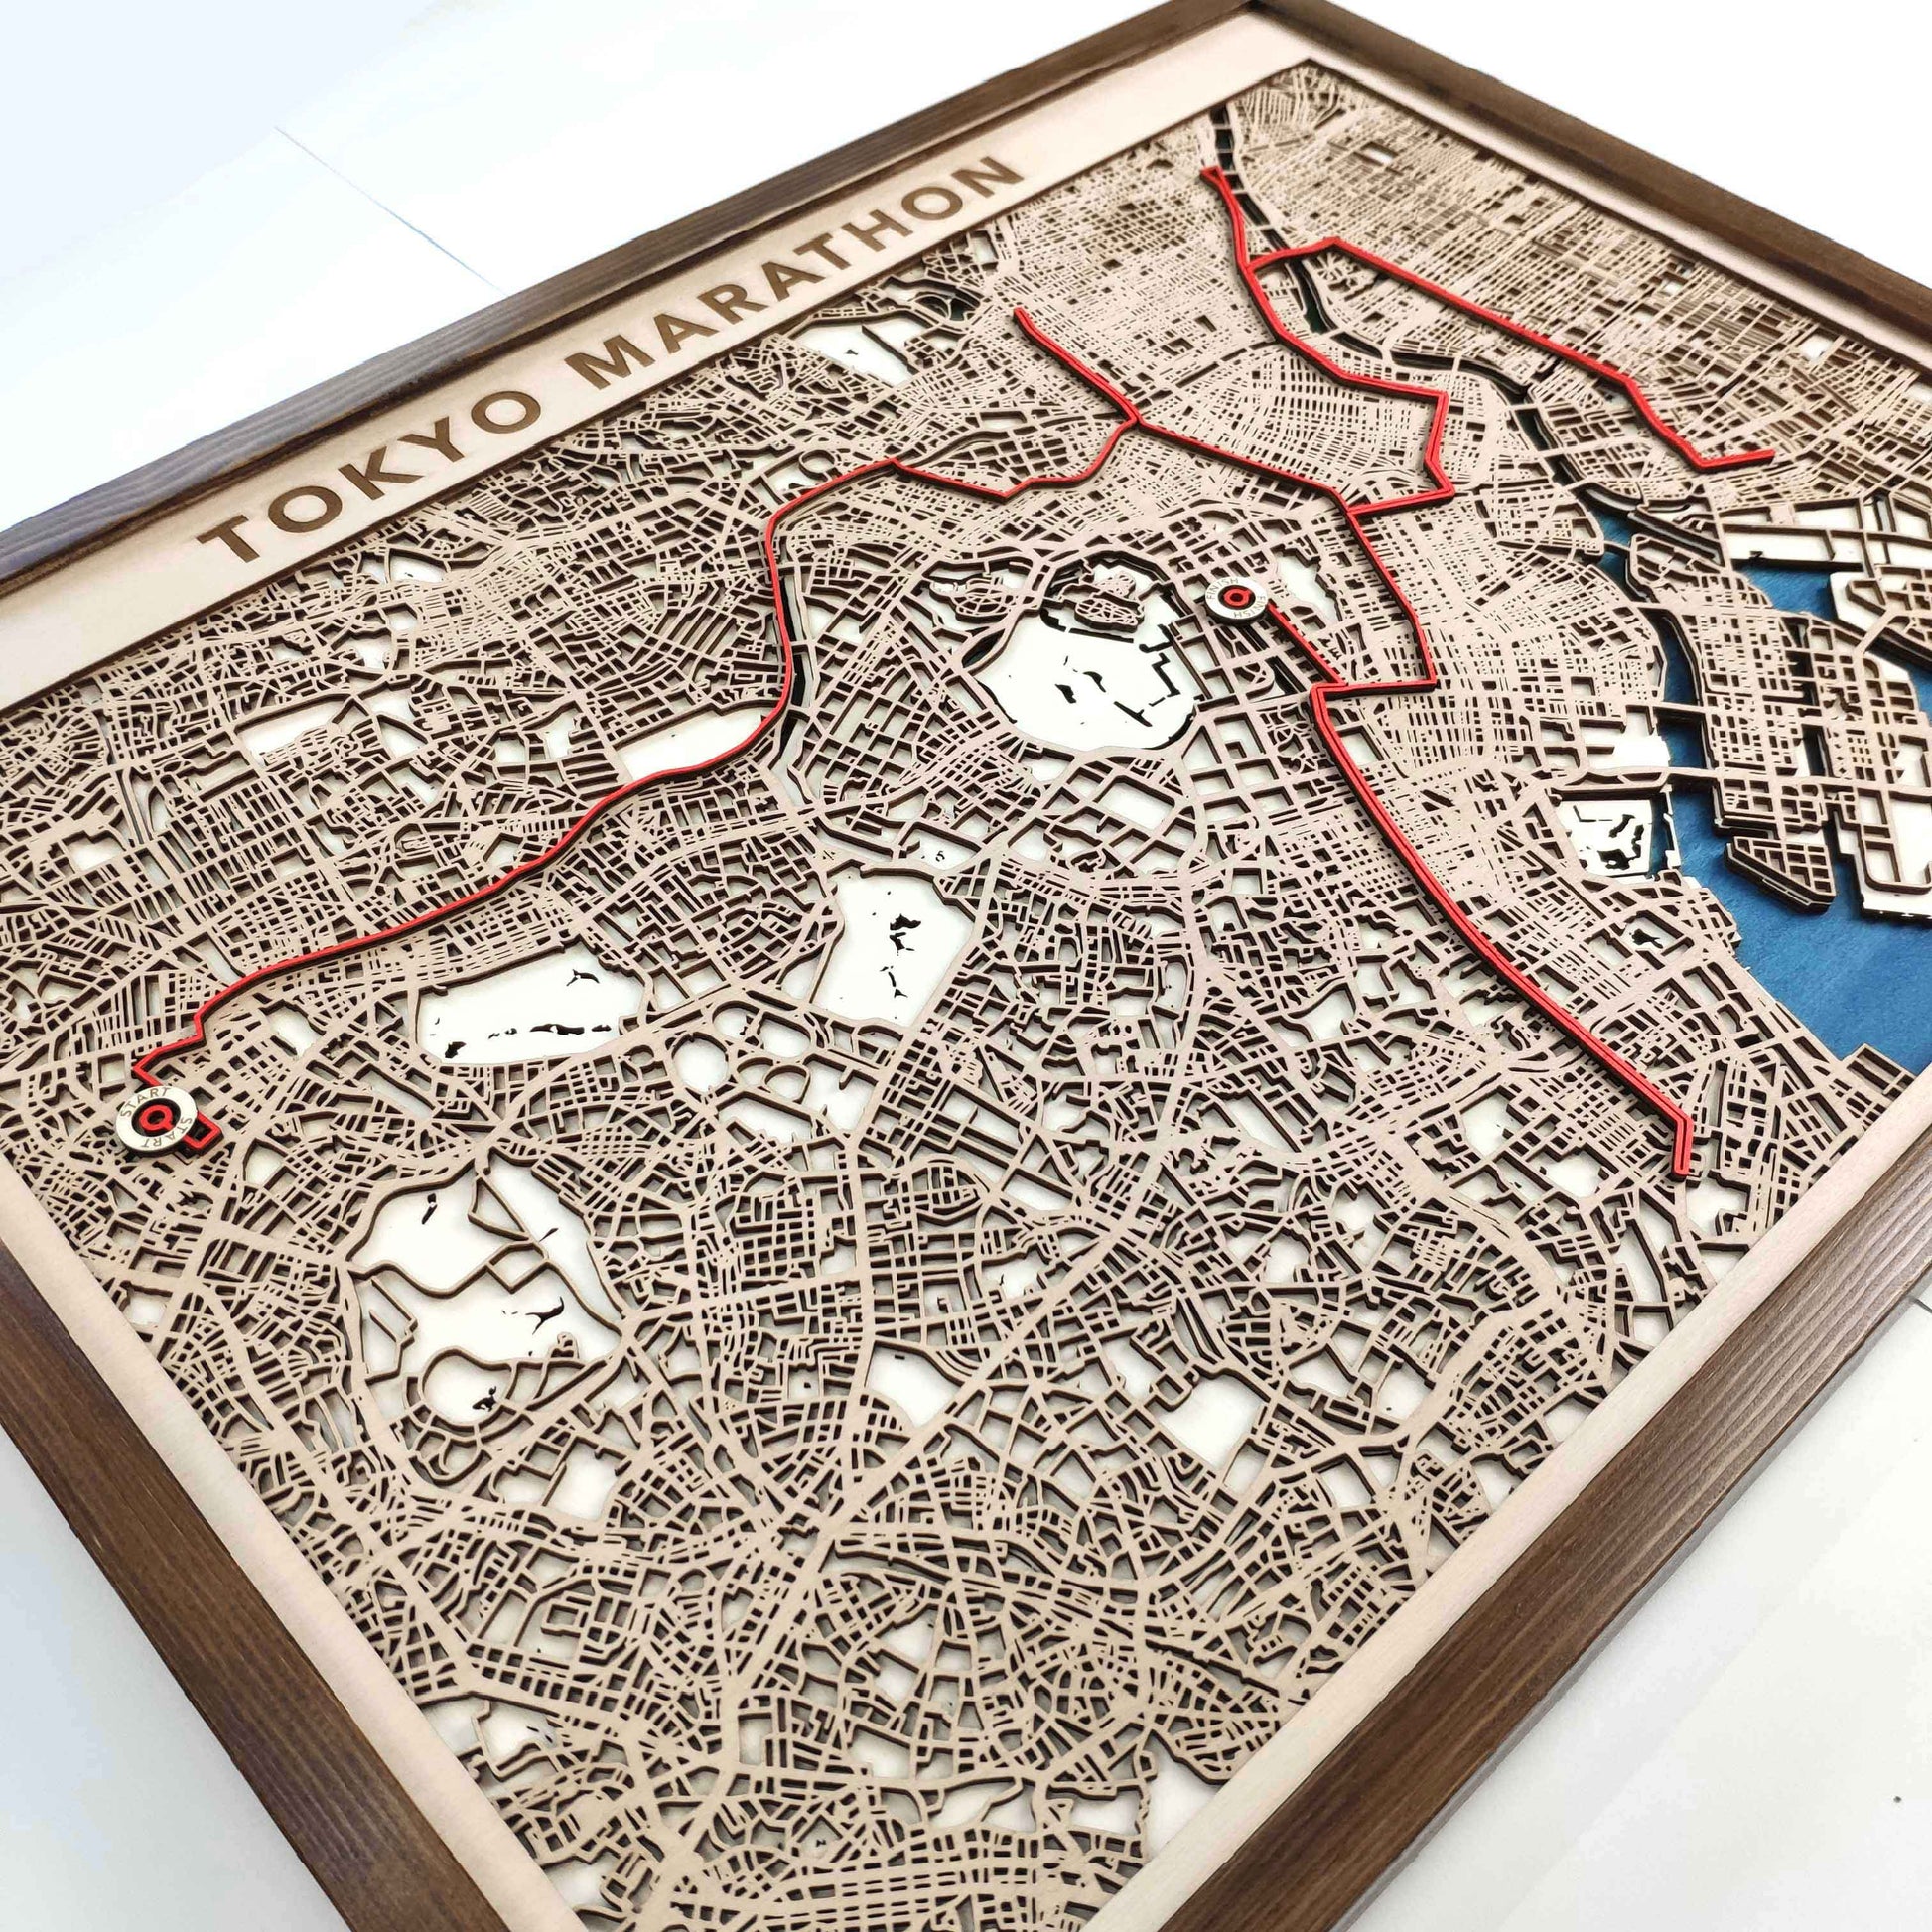 Tokyo Marathon Commemorative Wooden Route Map – Collector's Item by CityWood - Custom Wood Map Art - Unique Laser Cut Engraved - Anniversary Gift